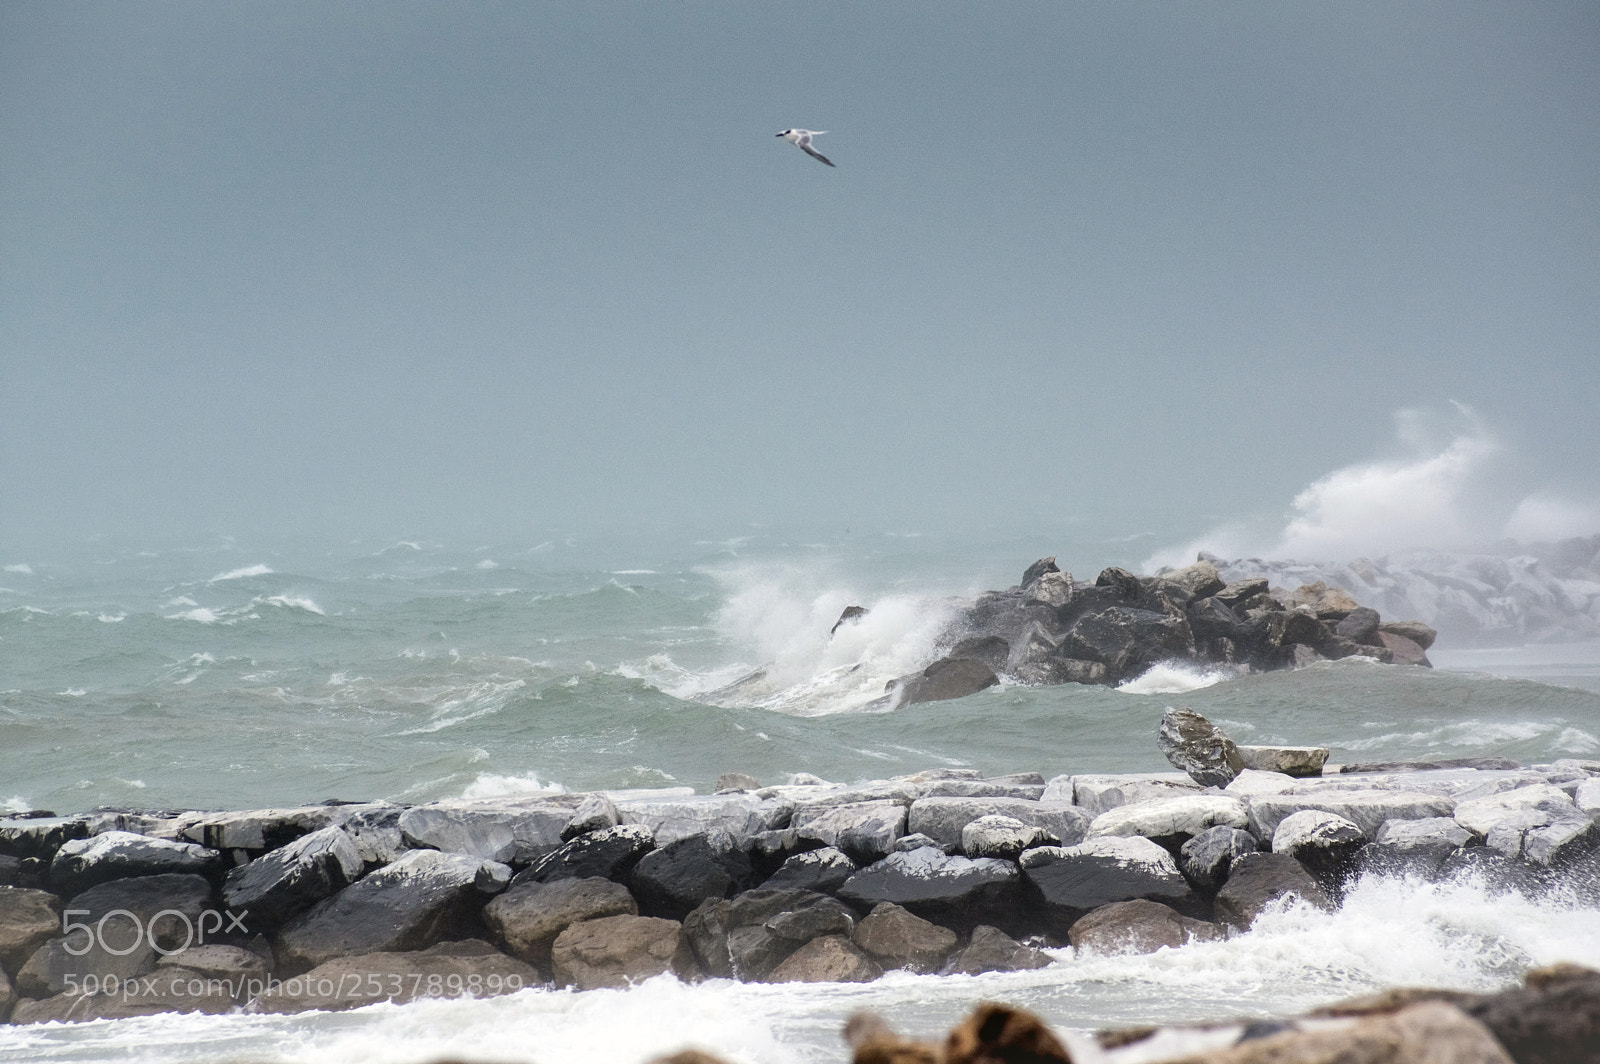 Pentax K-3 II sample photo. Mare mosso photography